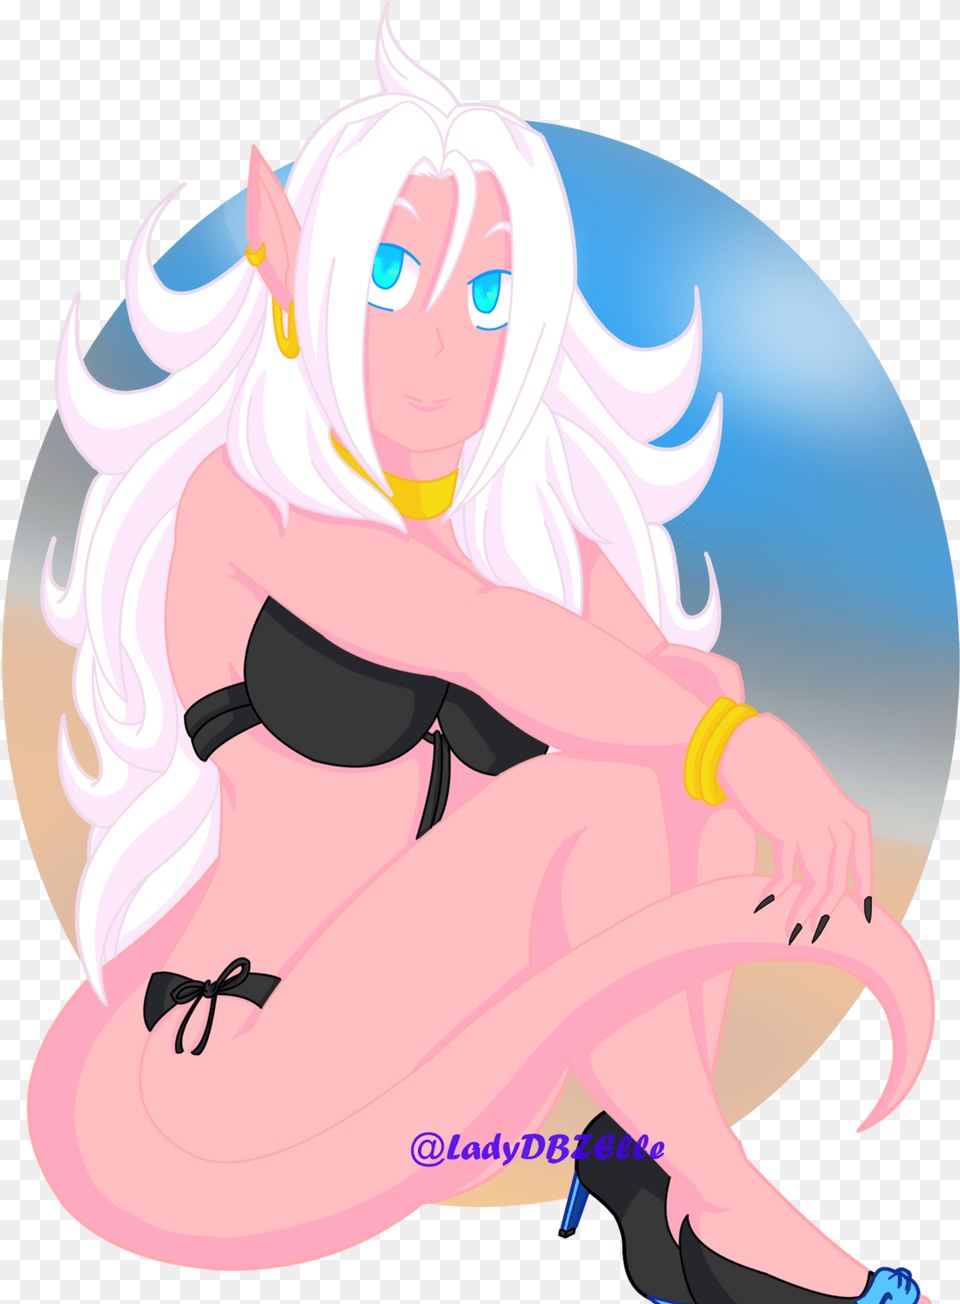 Android 21 In A Bikini That Someone Requested Me Anime, Book, Comics, Publication, Baby Free Png Download